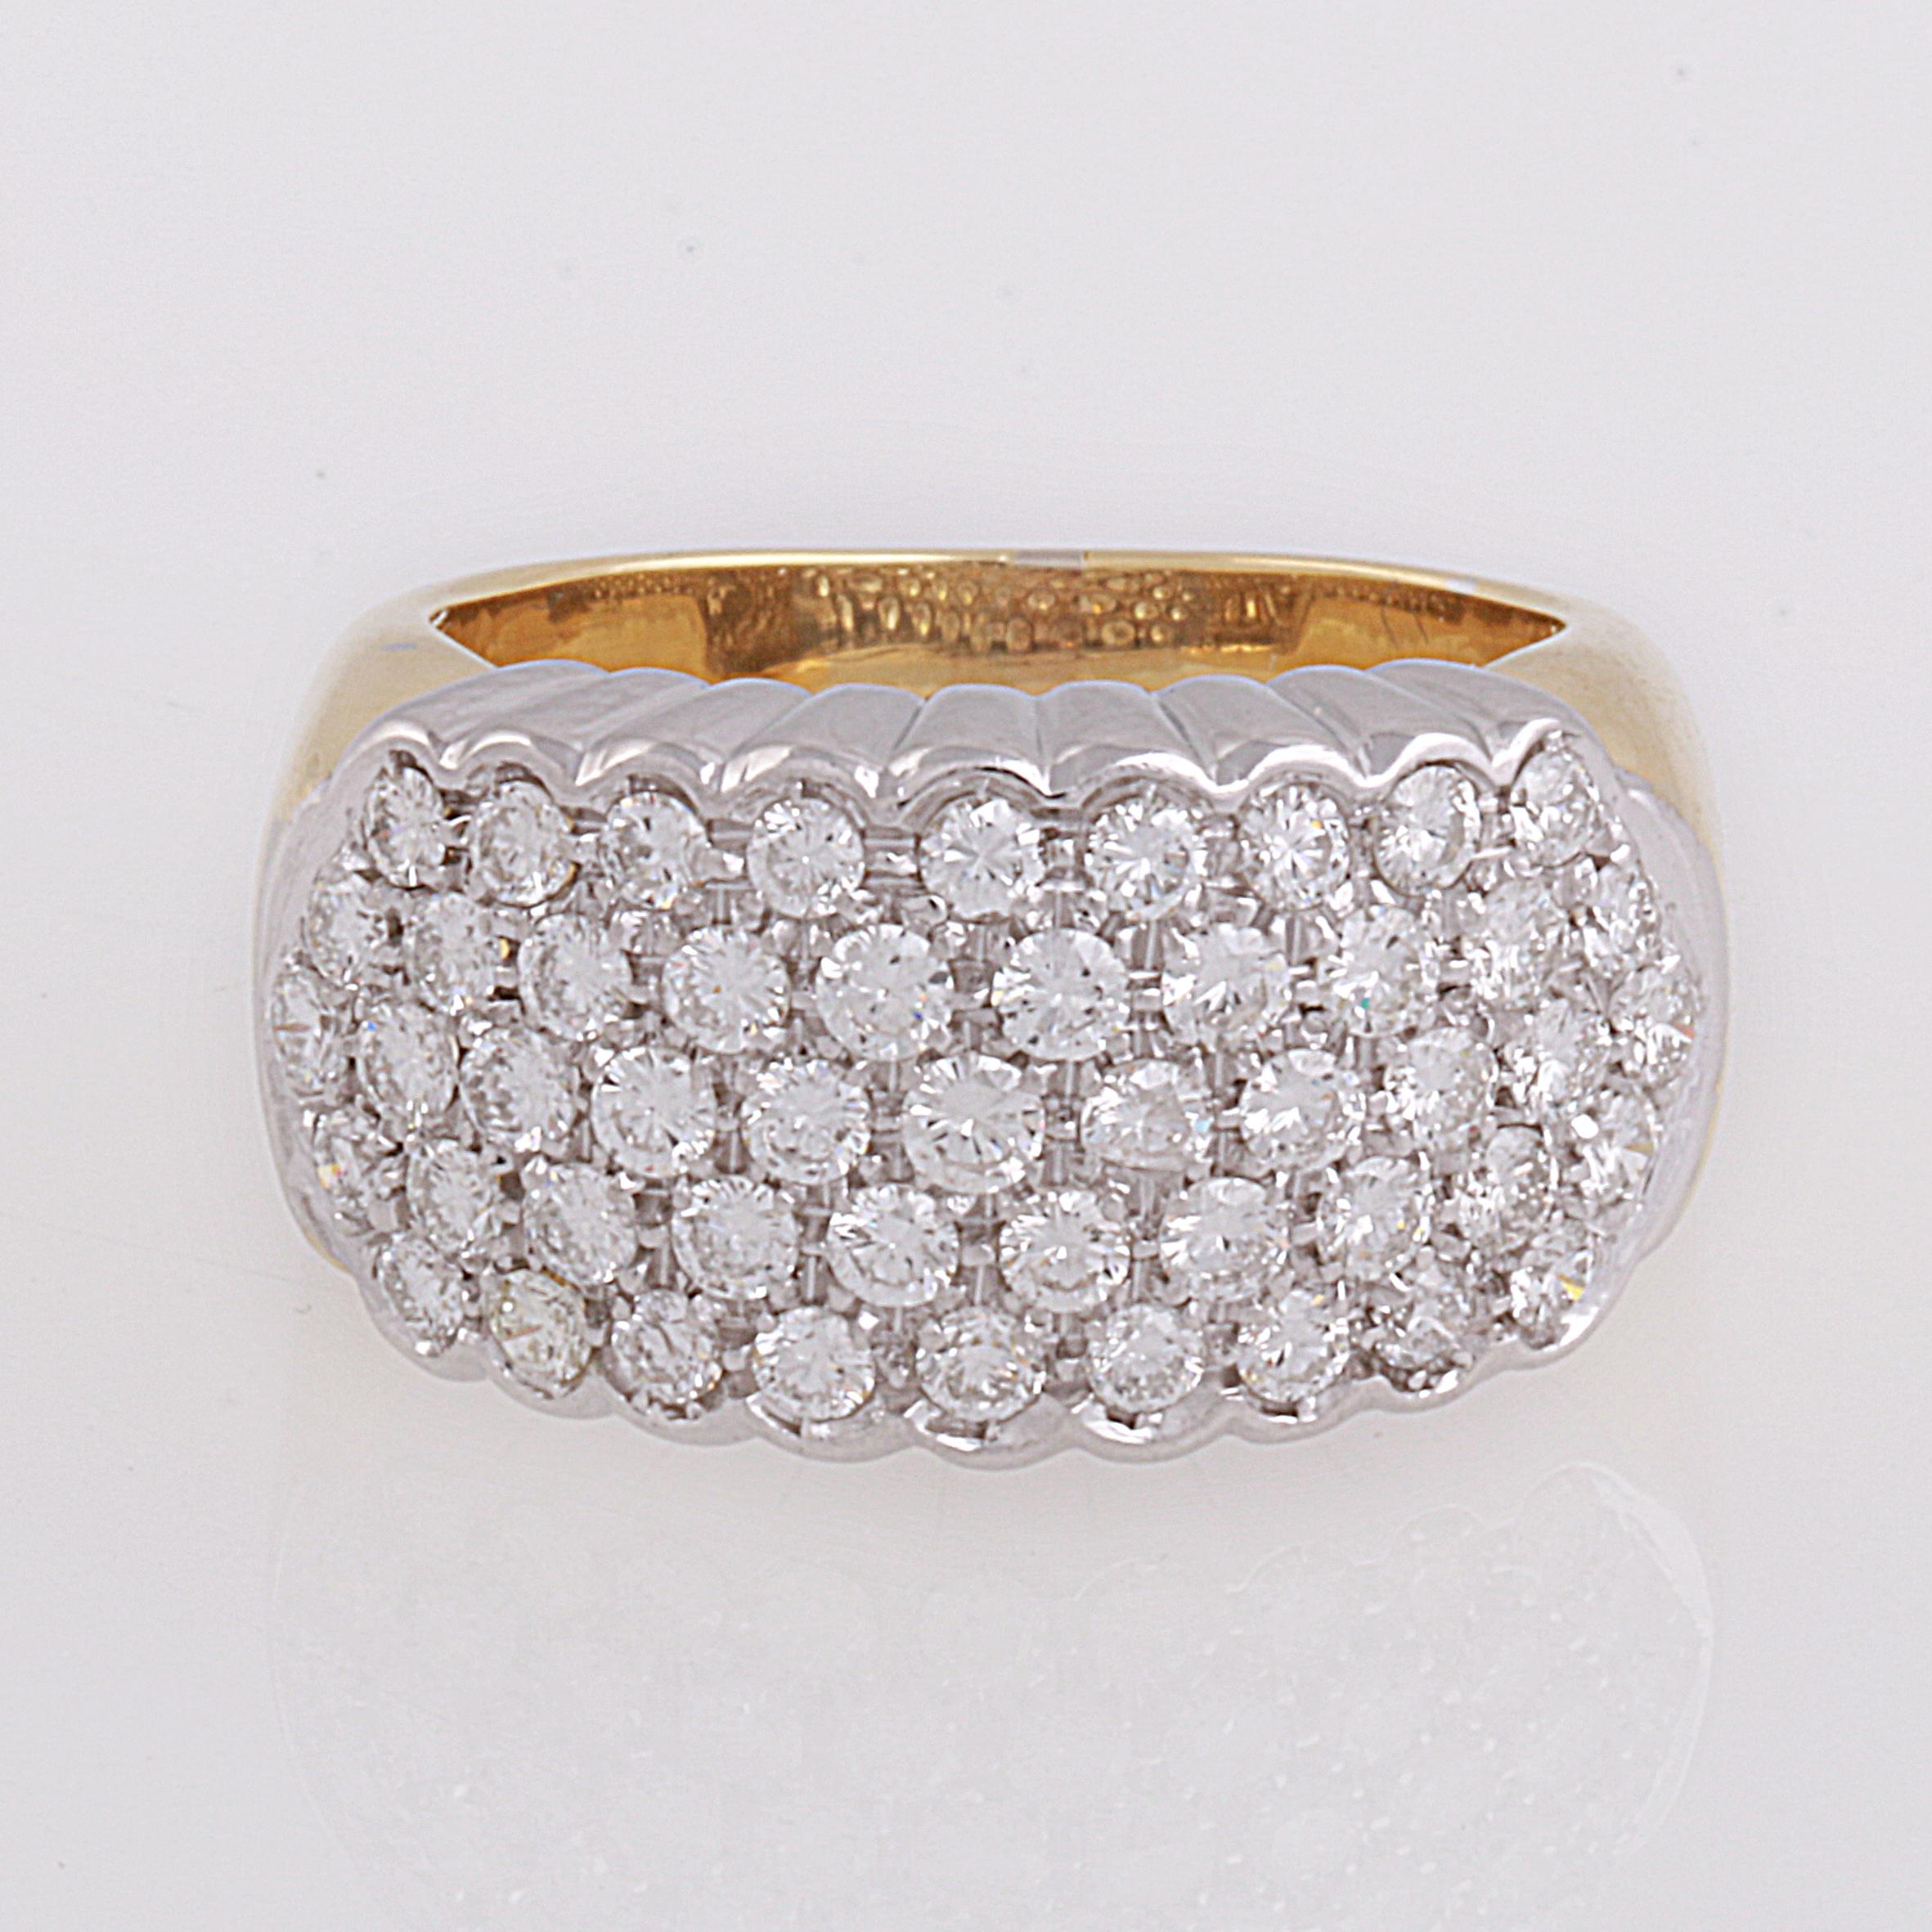 18Kt Yellow Gold Band with an 18 Kt White Gold Central part with an elegant Pavé Diamonds
About 50 diamonds, round brilliant cut, VS1/VS2 clarity, G/H Color for an estimated total diamond weight of 0.70 cts.

Made in Italy
Hallmarked.